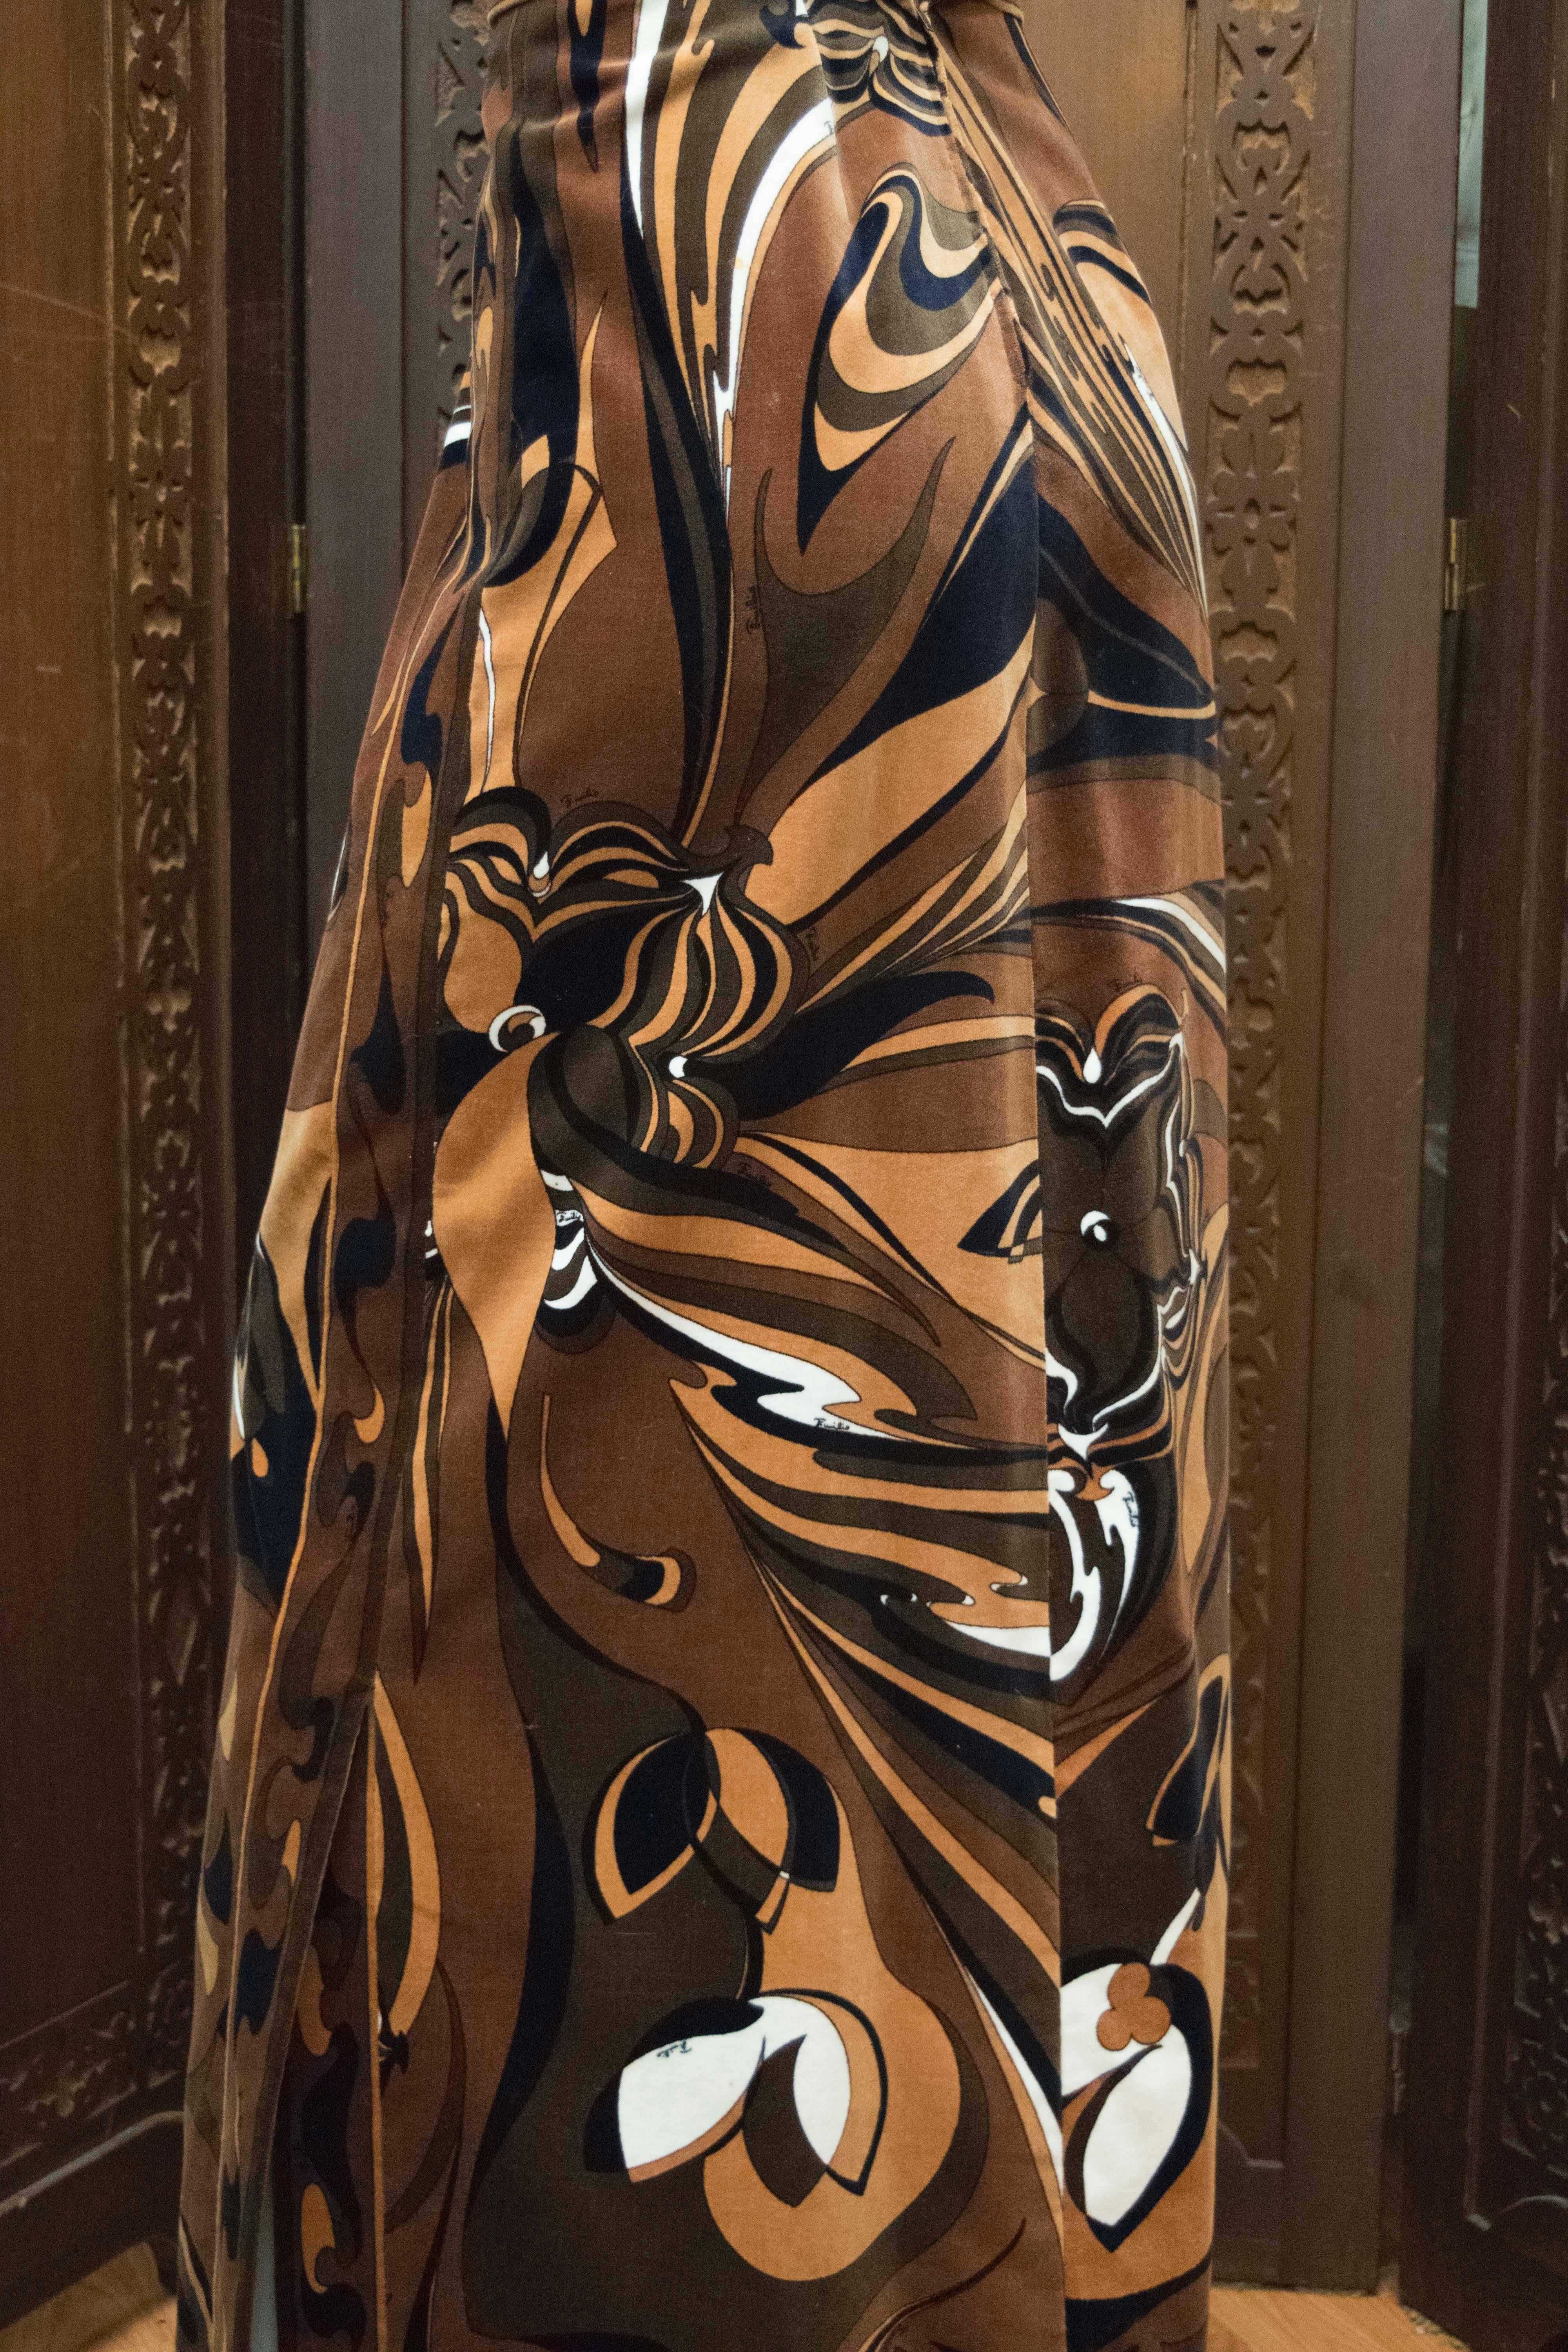 Pucci Velvet Evening Skirt In Excellent Condition For Sale In San Francisco, CA